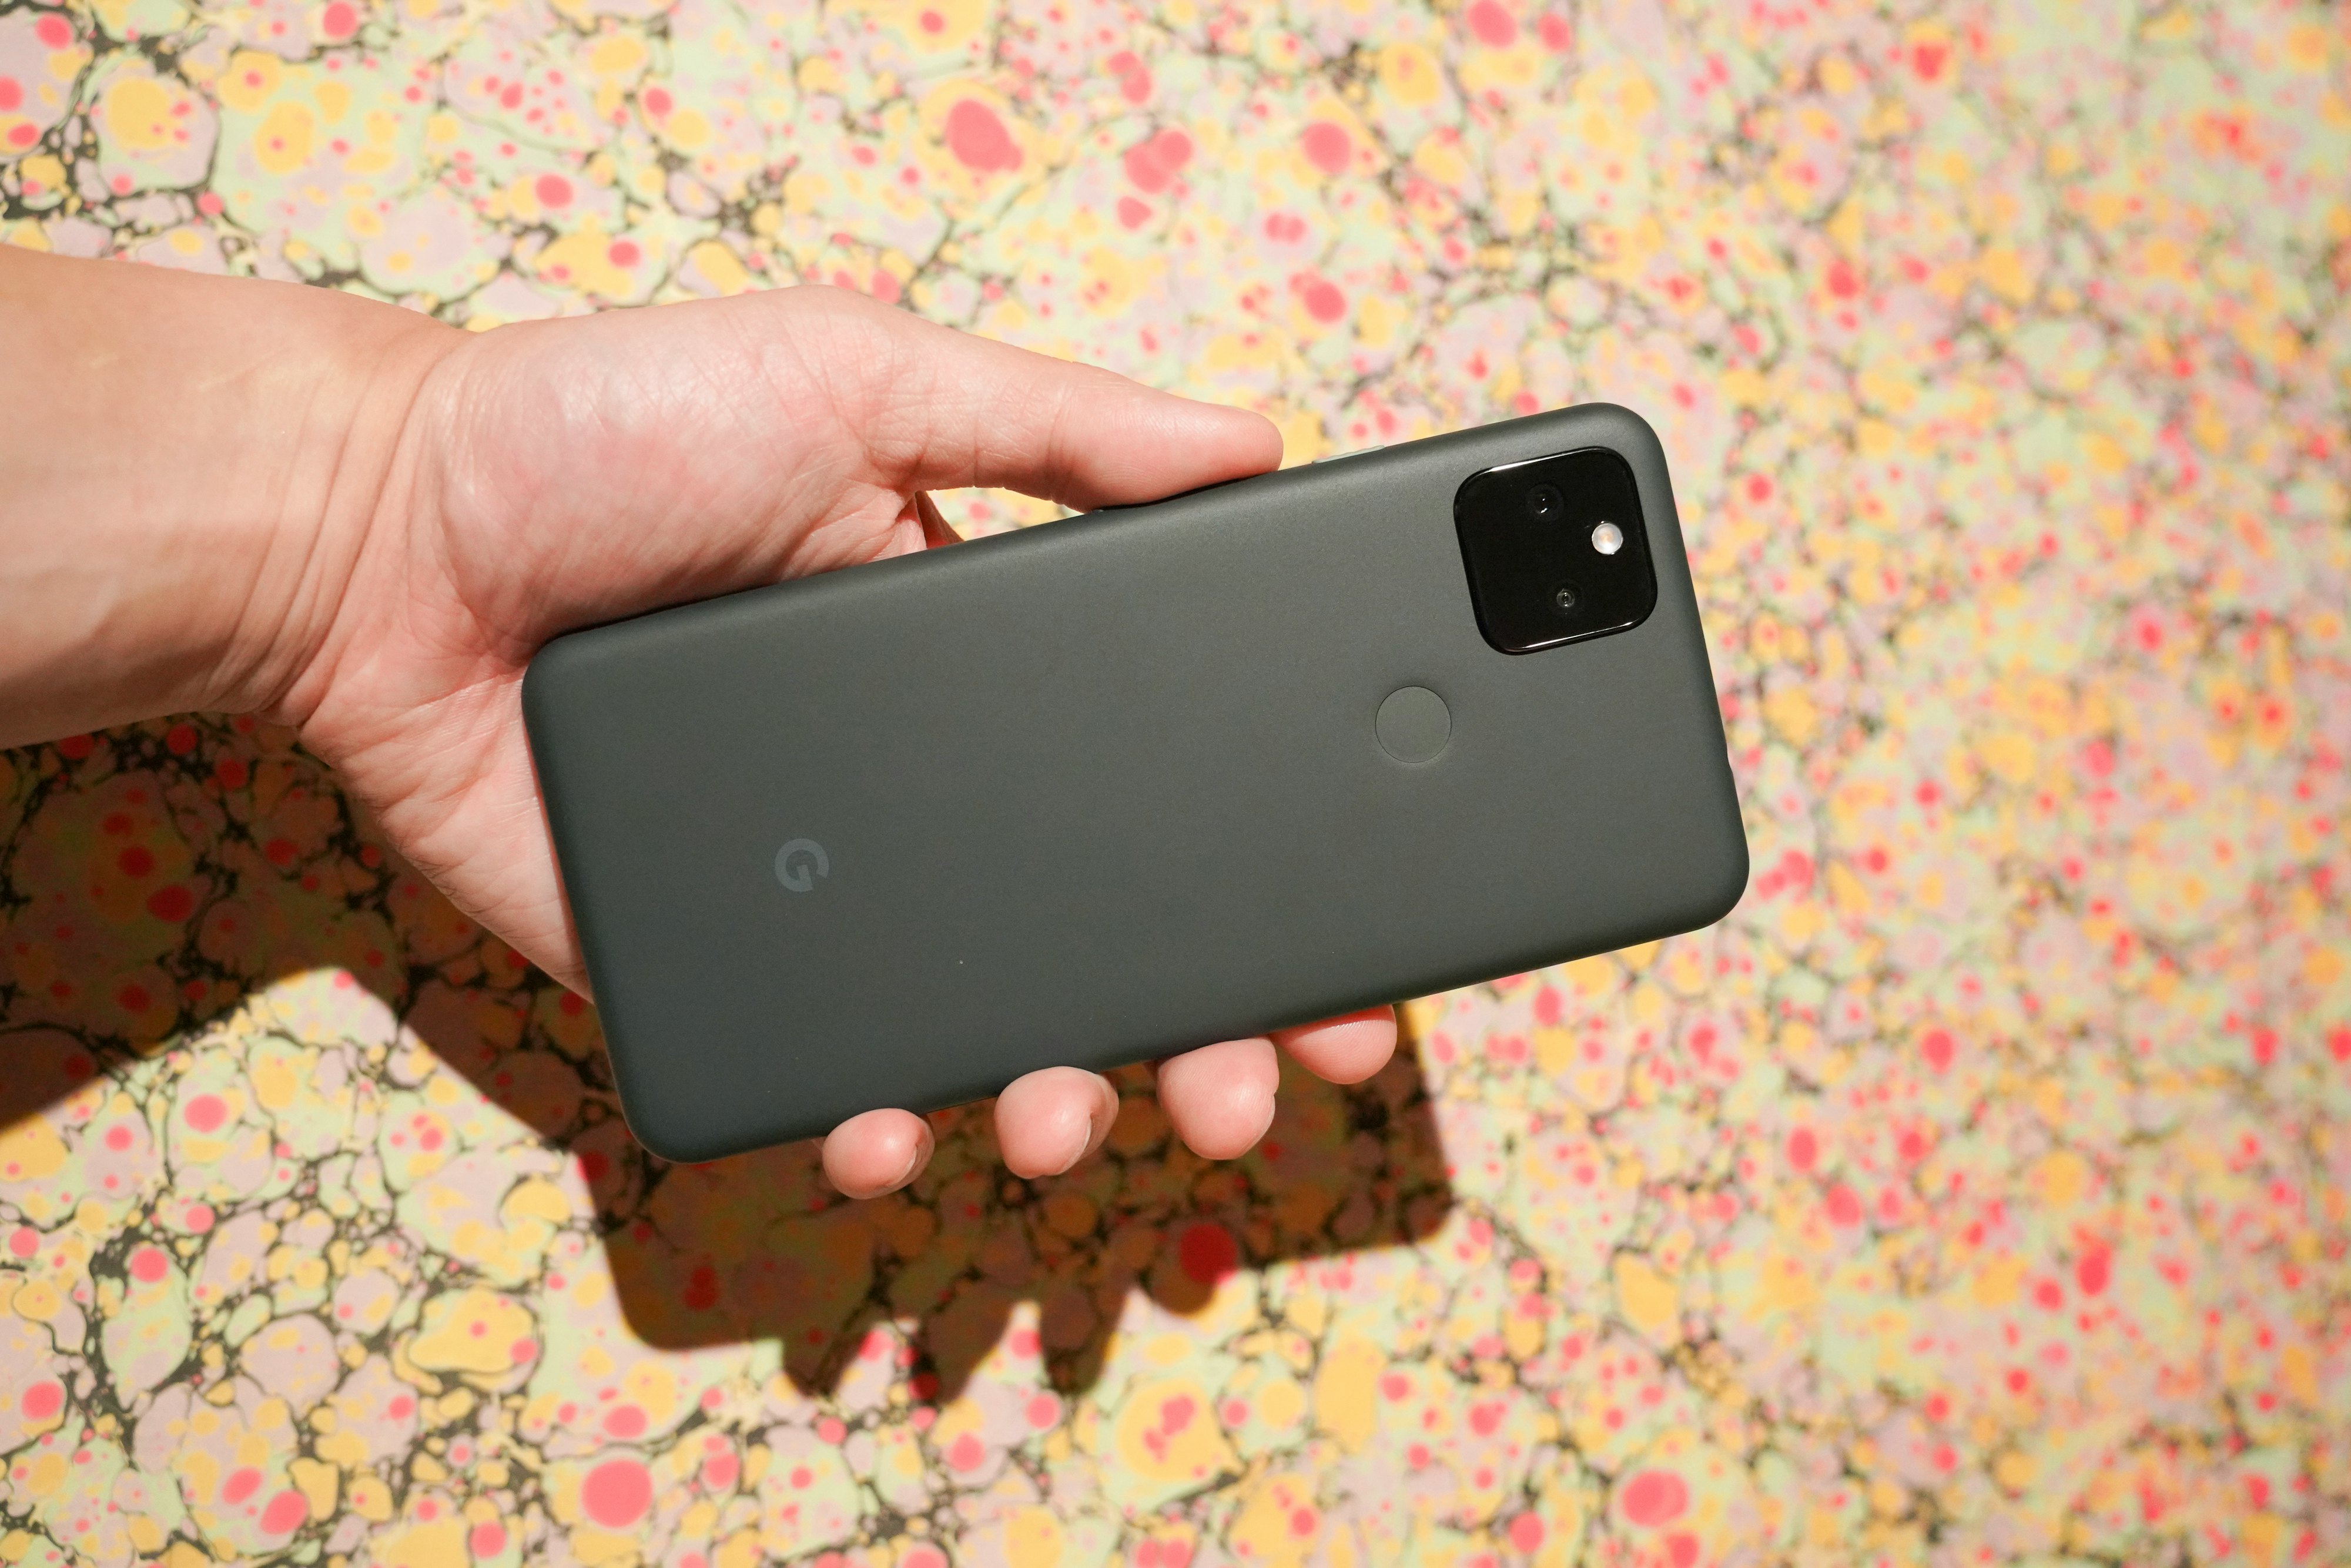 Google Pixel 5a (5G) review: Basic, affordable, and gimmick-free